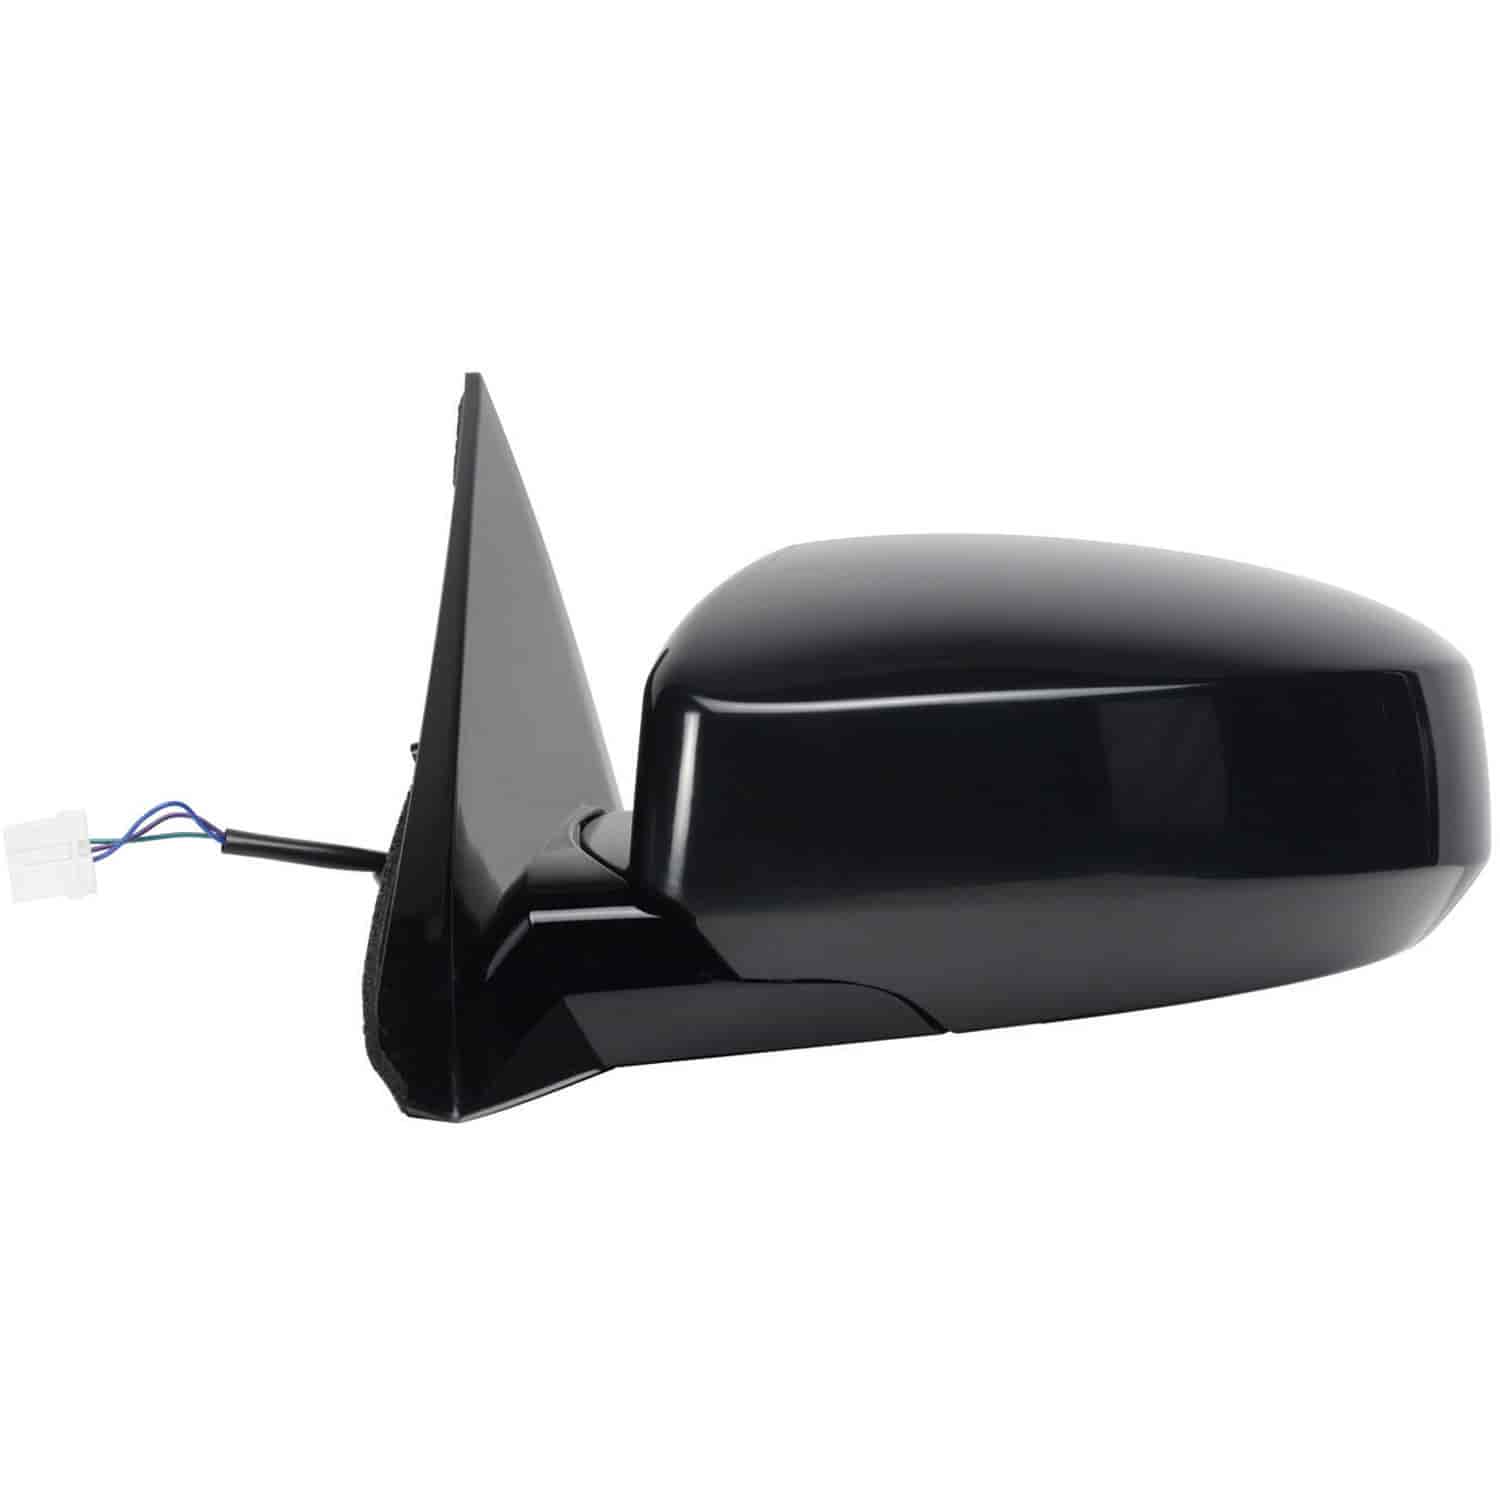 OEM Style Replacement mirror for 04-08 Nissan Maxima